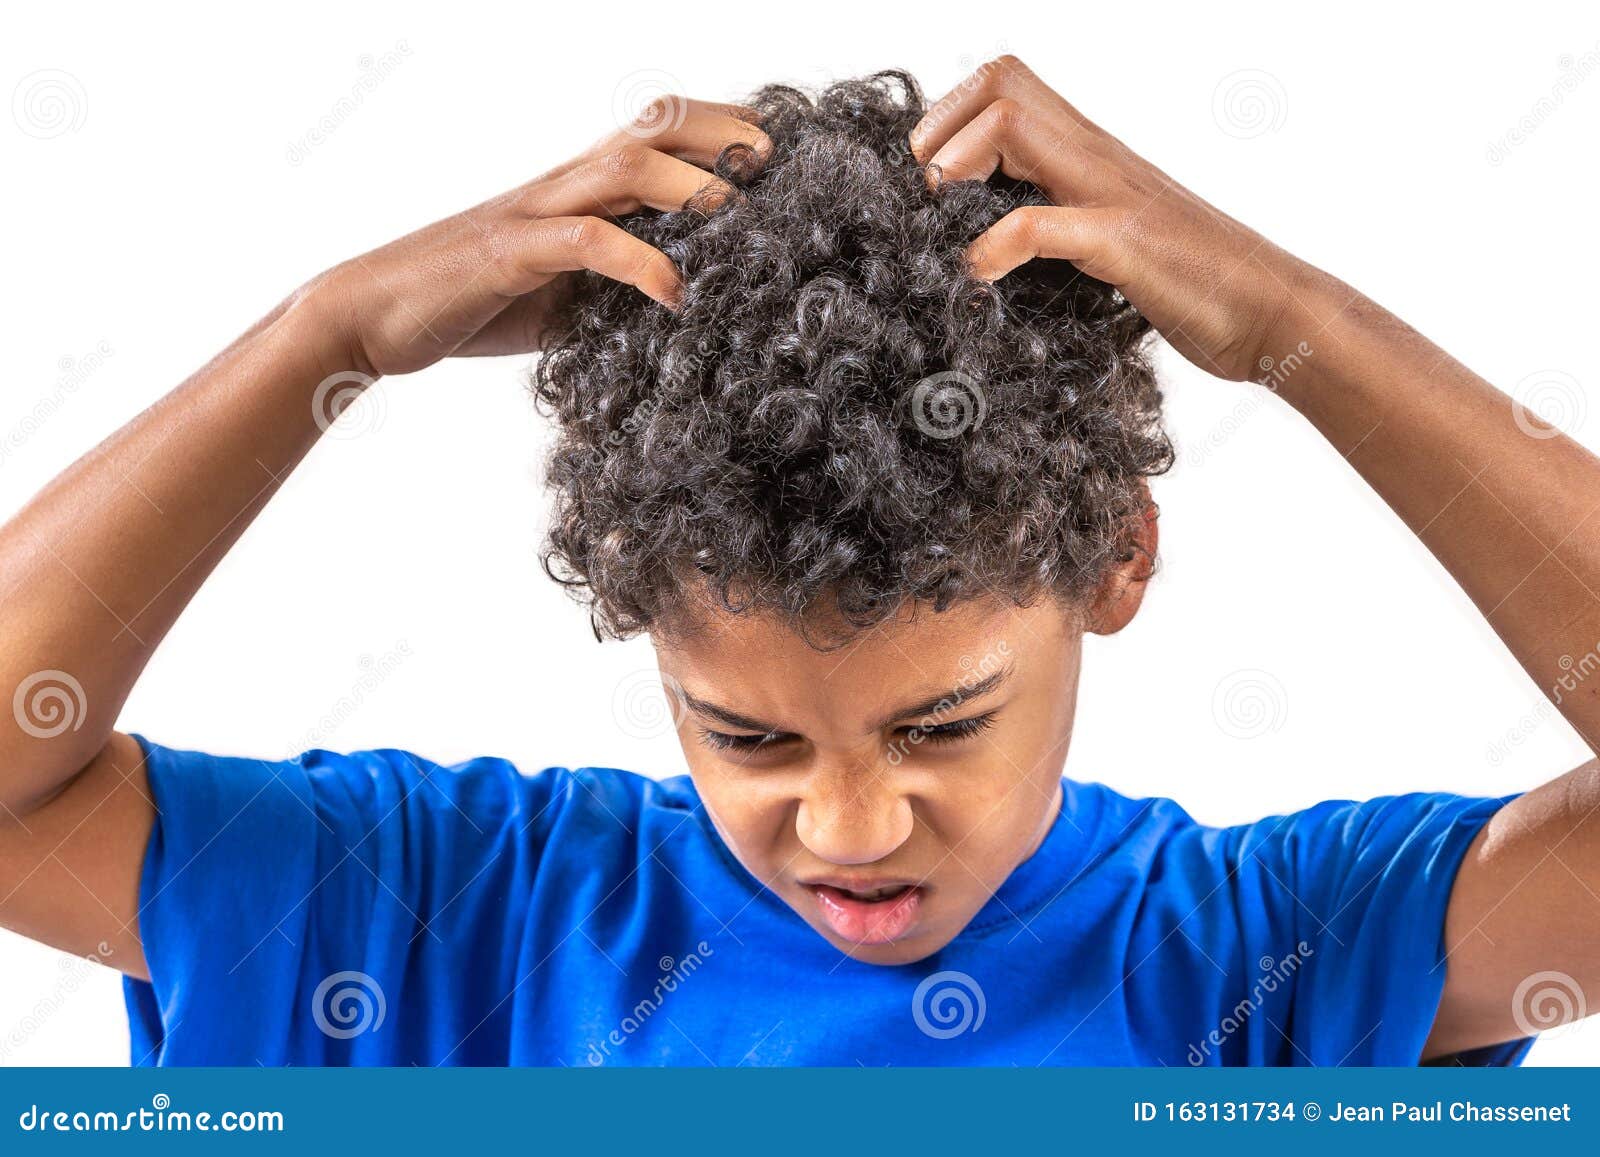 Sad Young Boy Scratching Hair for Head Lice or Allergies Stock Photo -  Image of allergies, grey: 163131734